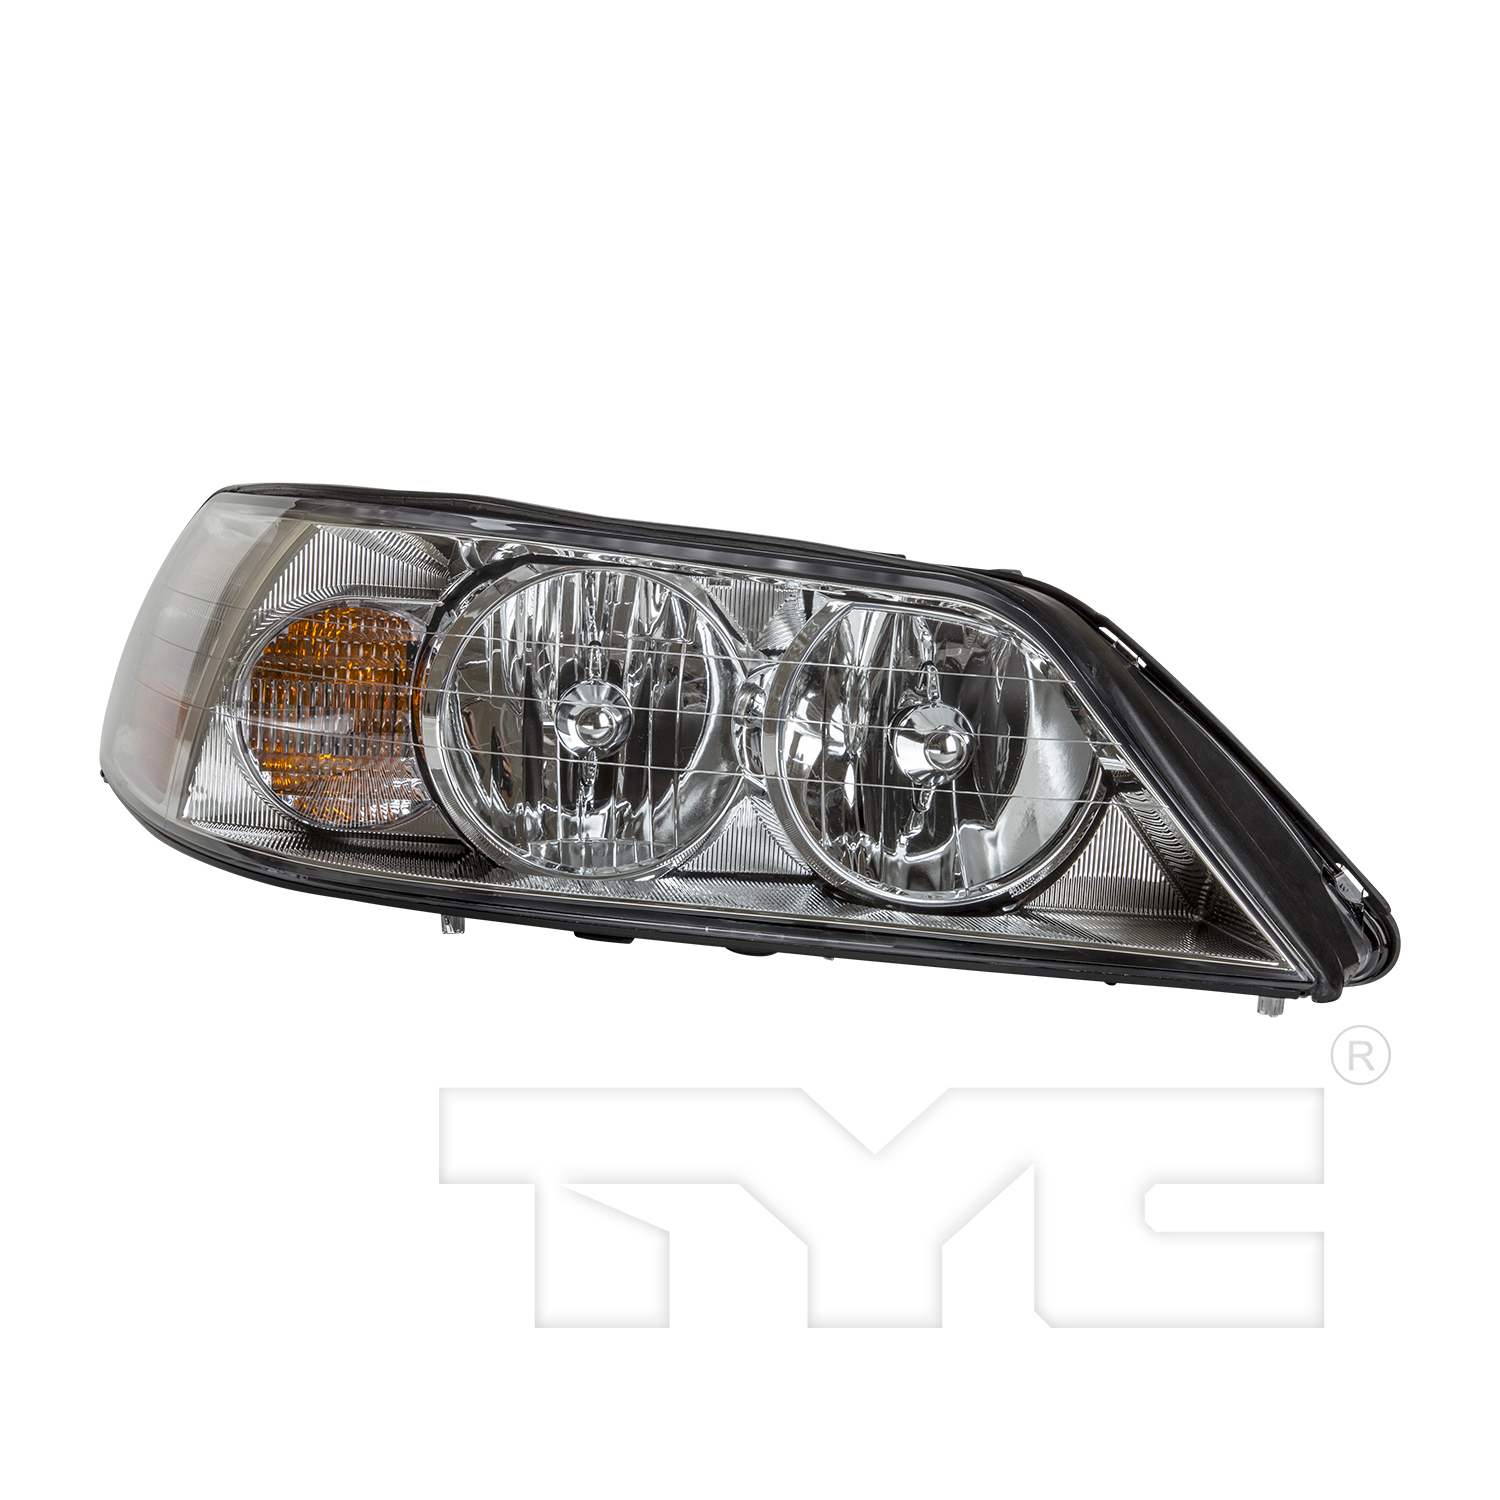 Aftermarket HEADLIGHTS for LINCOLN - TOWN CAR, TOWN CAR,05-11,RT Headlamp assy composite